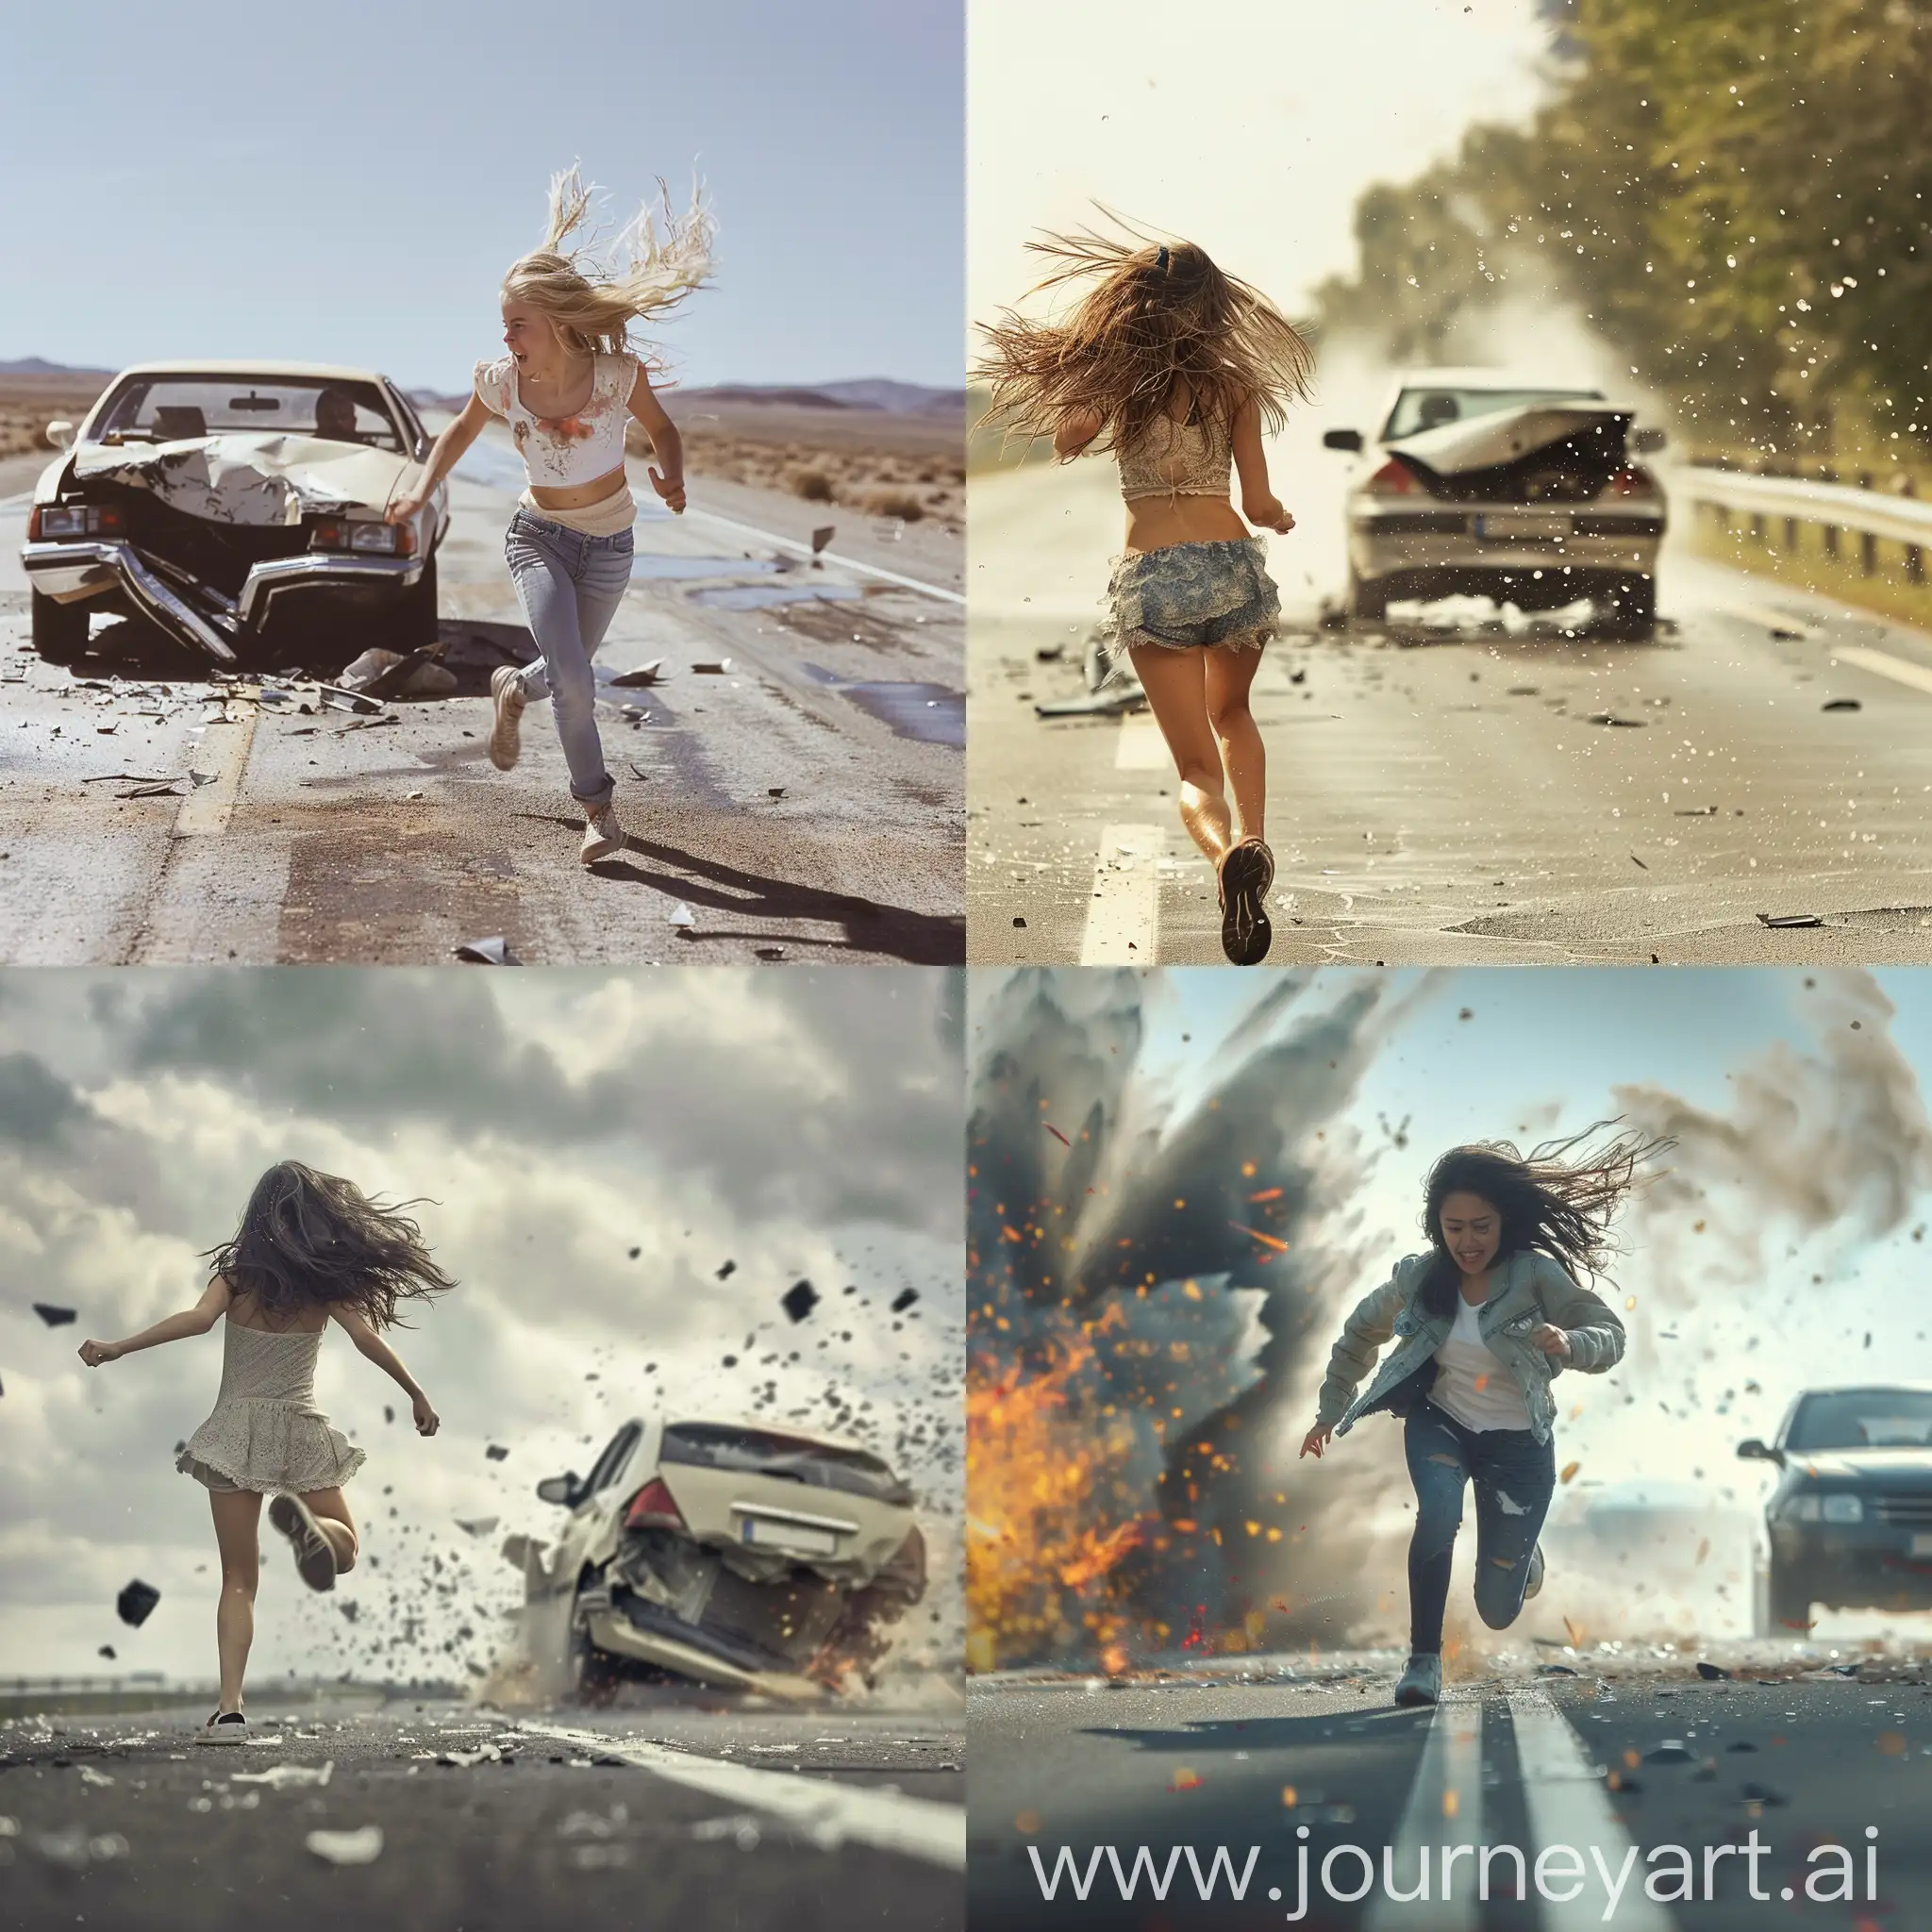 Young-Girl-Running-on-Road-Amidst-Car-Crash